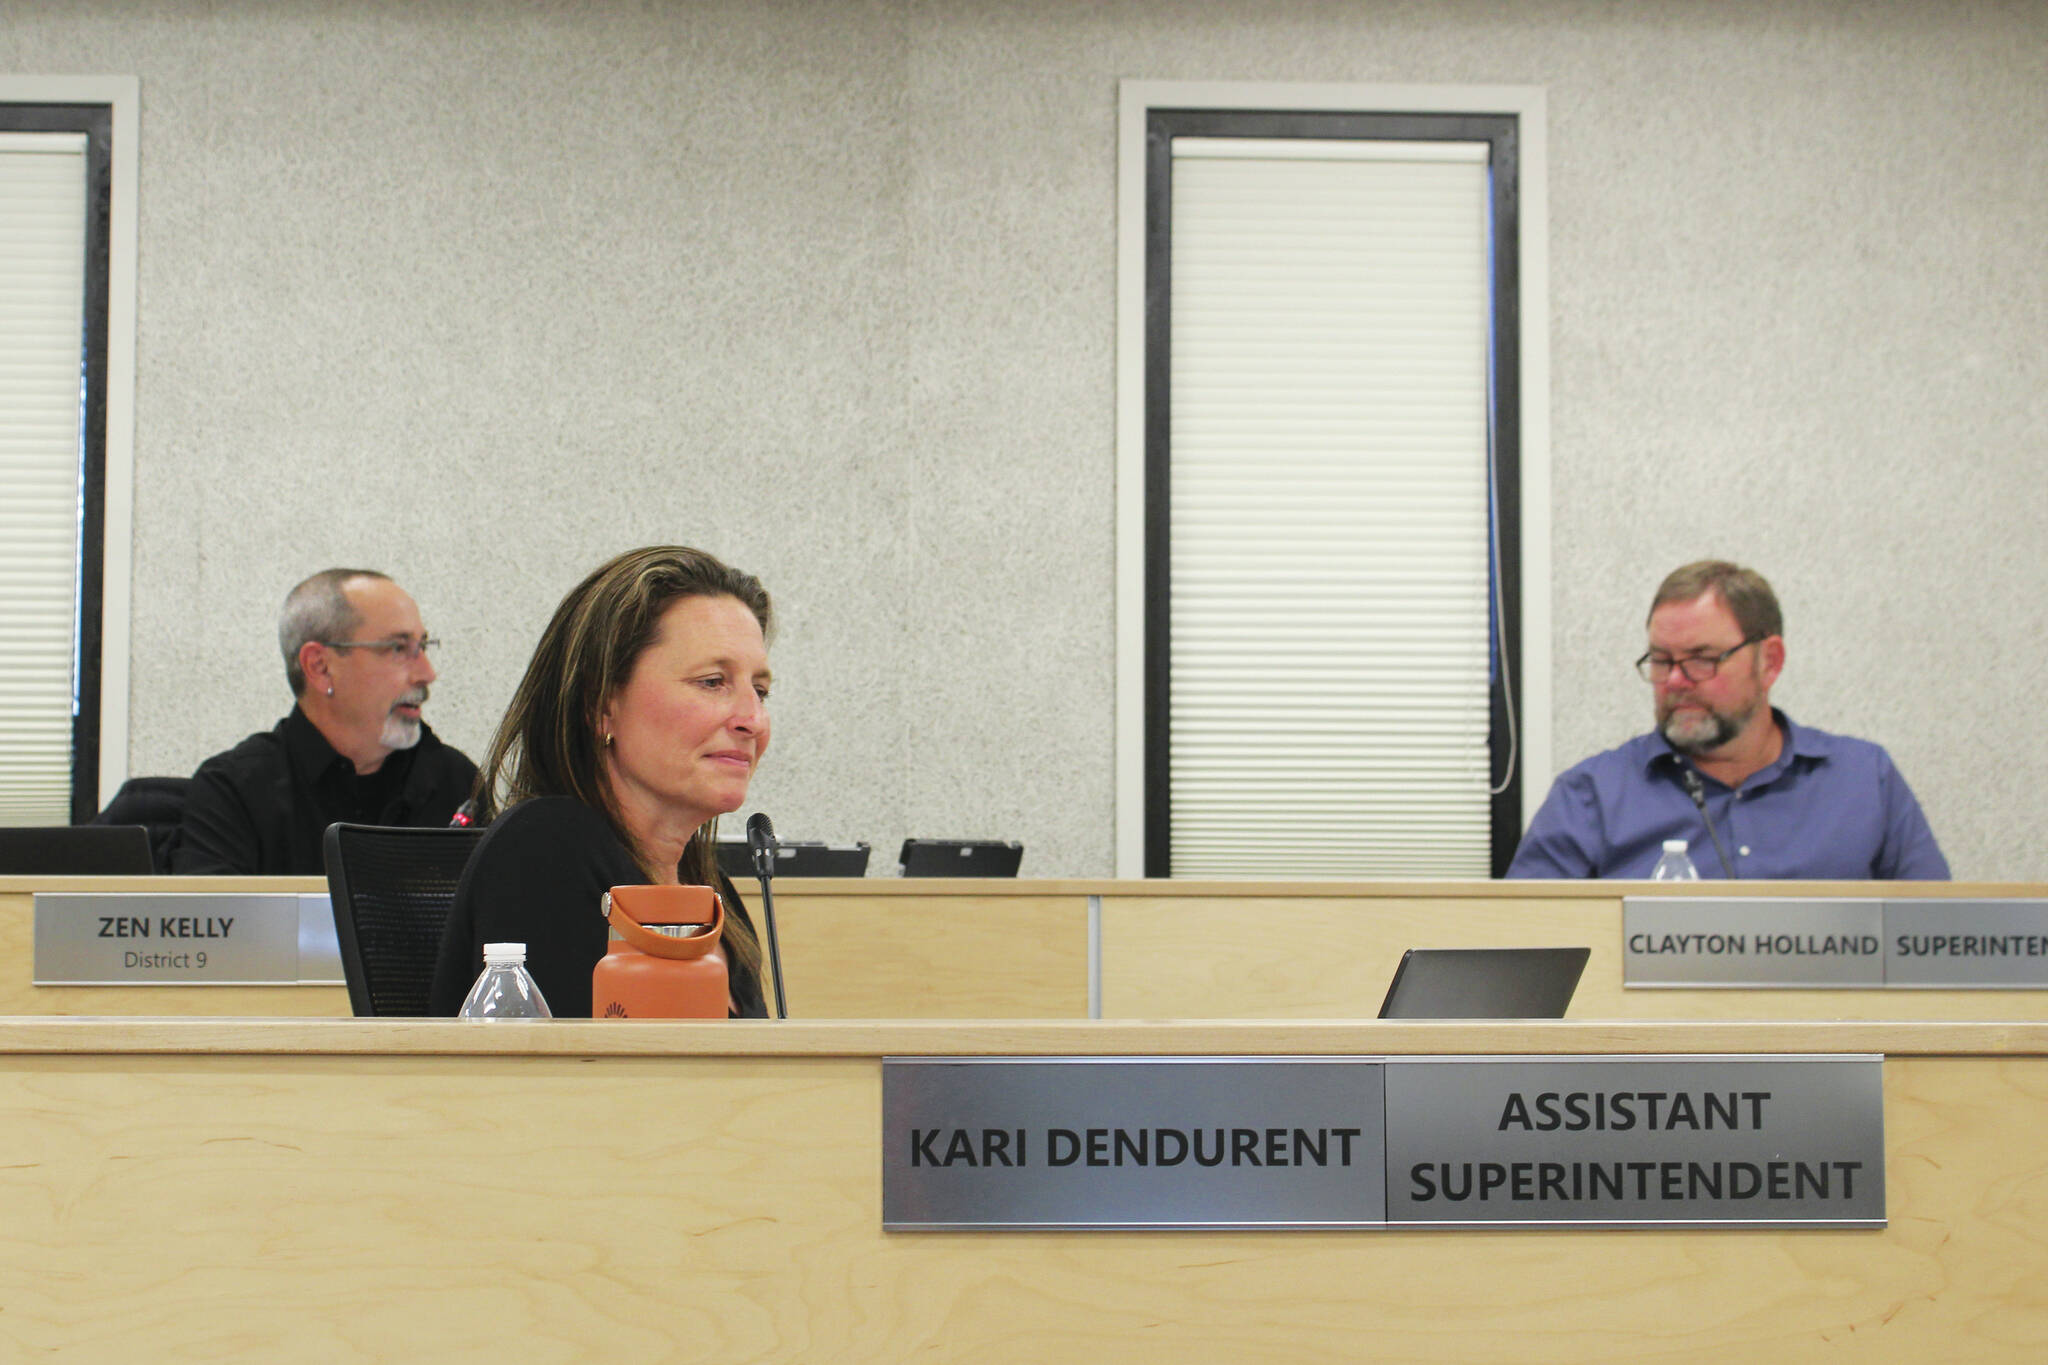 Ashlyn O’Hara / Peninsula Clarion
Kenai Peninsula Borough School District Assistant Superintendent Kari Dendurent (front left) and Superintendent Clayton Holland (back right) listen as Board of Education President Zen Kelly (back left) speaks at a board meeting on Monday in Soldotna.